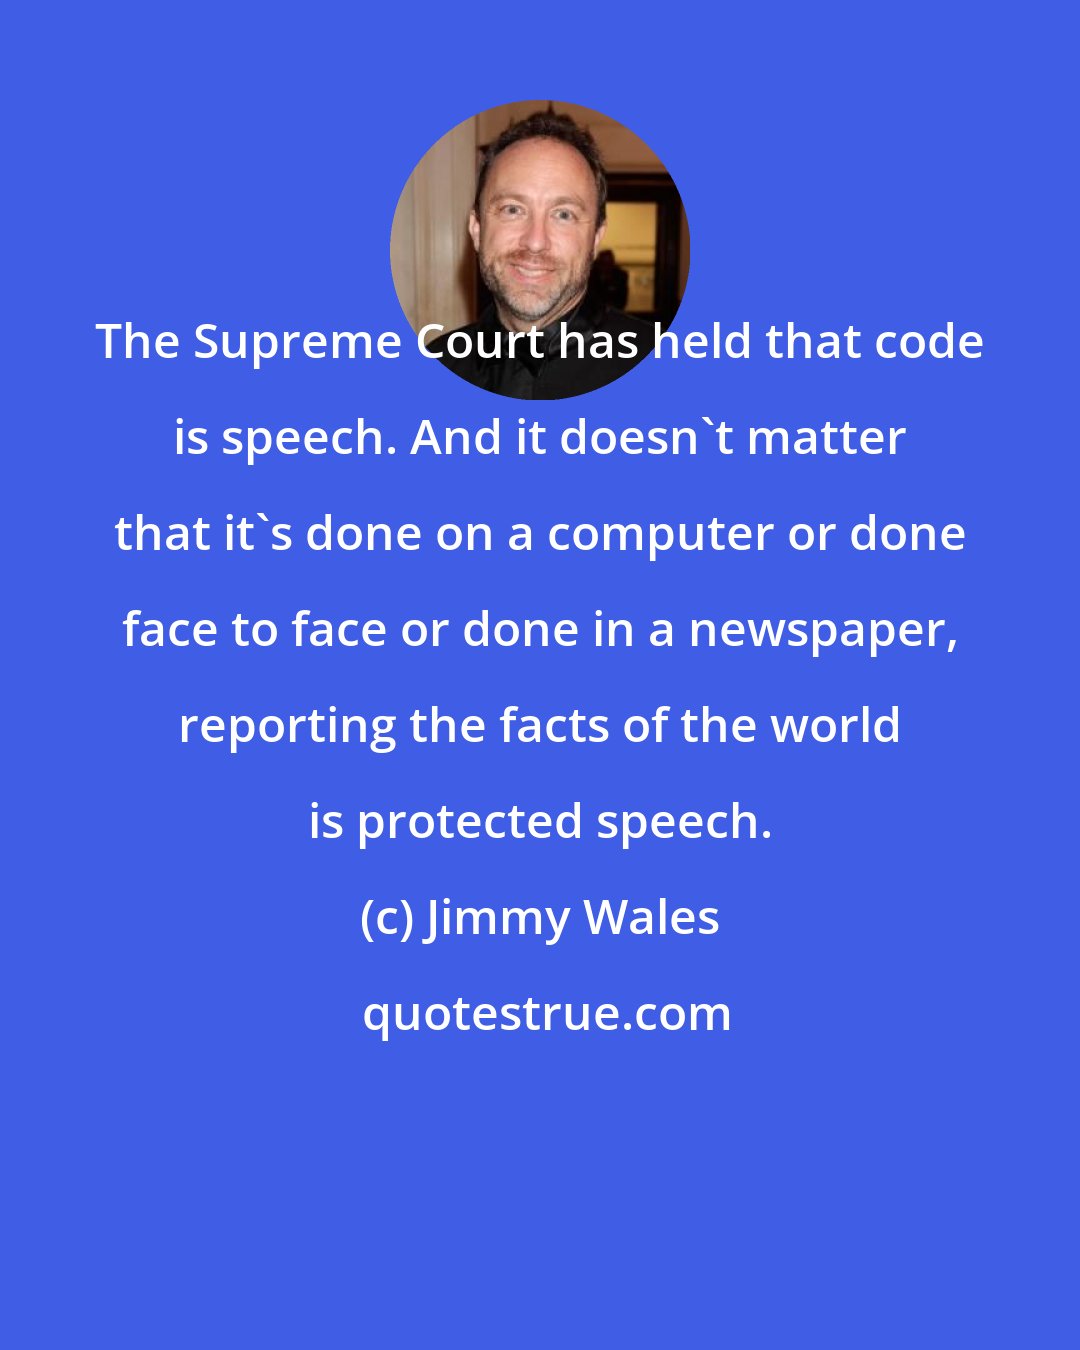 Jimmy Wales: The Supreme Court has held that code is speech. And it doesn't matter that it's done on a computer or done face to face or done in a newspaper, reporting the facts of the world is protected speech.